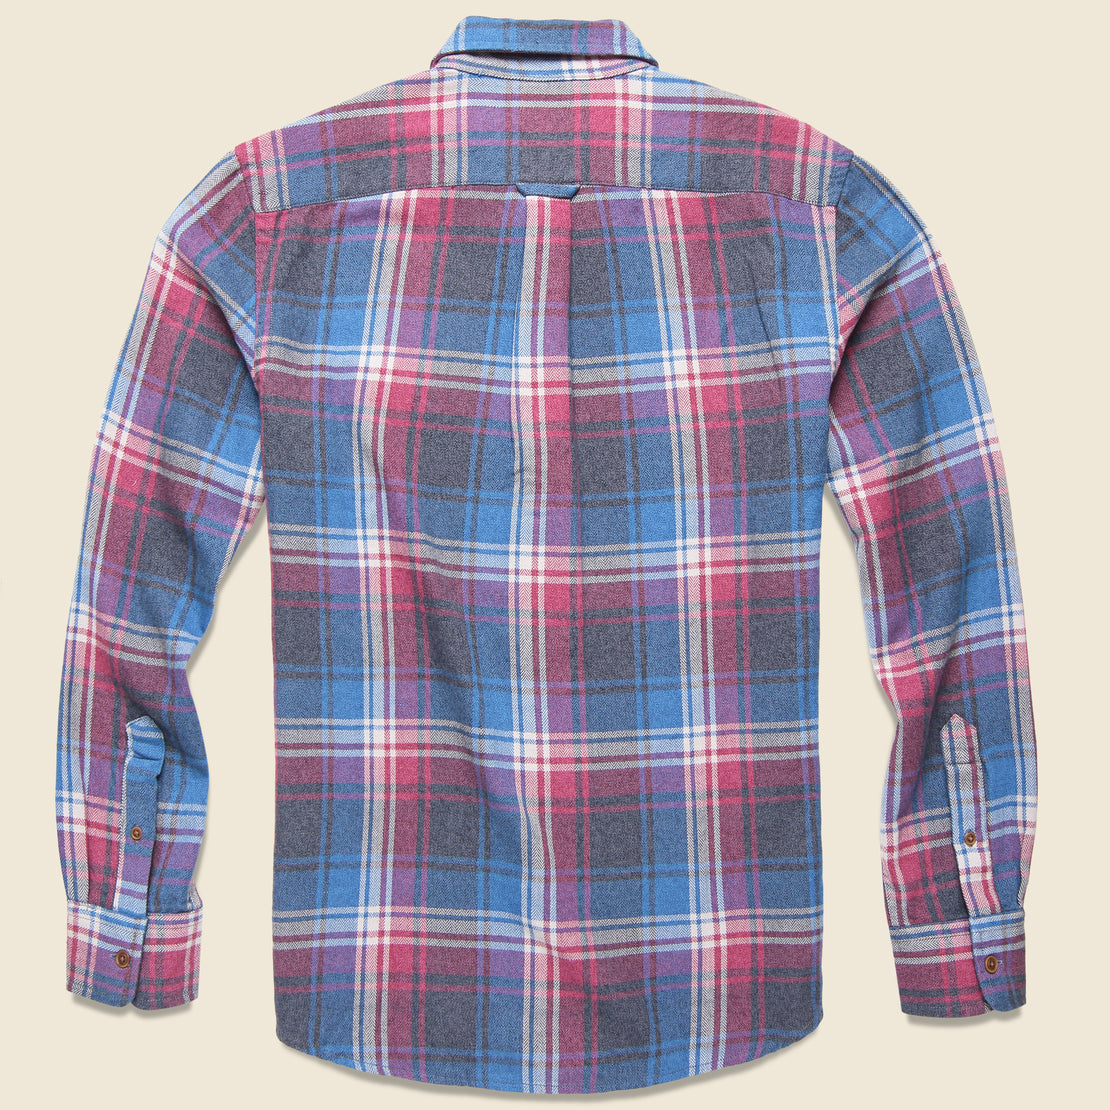 Yarmouth 3-Ply Jaspe Flannel - Violet/Gray/Blue - Grayers - STAG Provisions - Tops - L/S Woven - Plaid